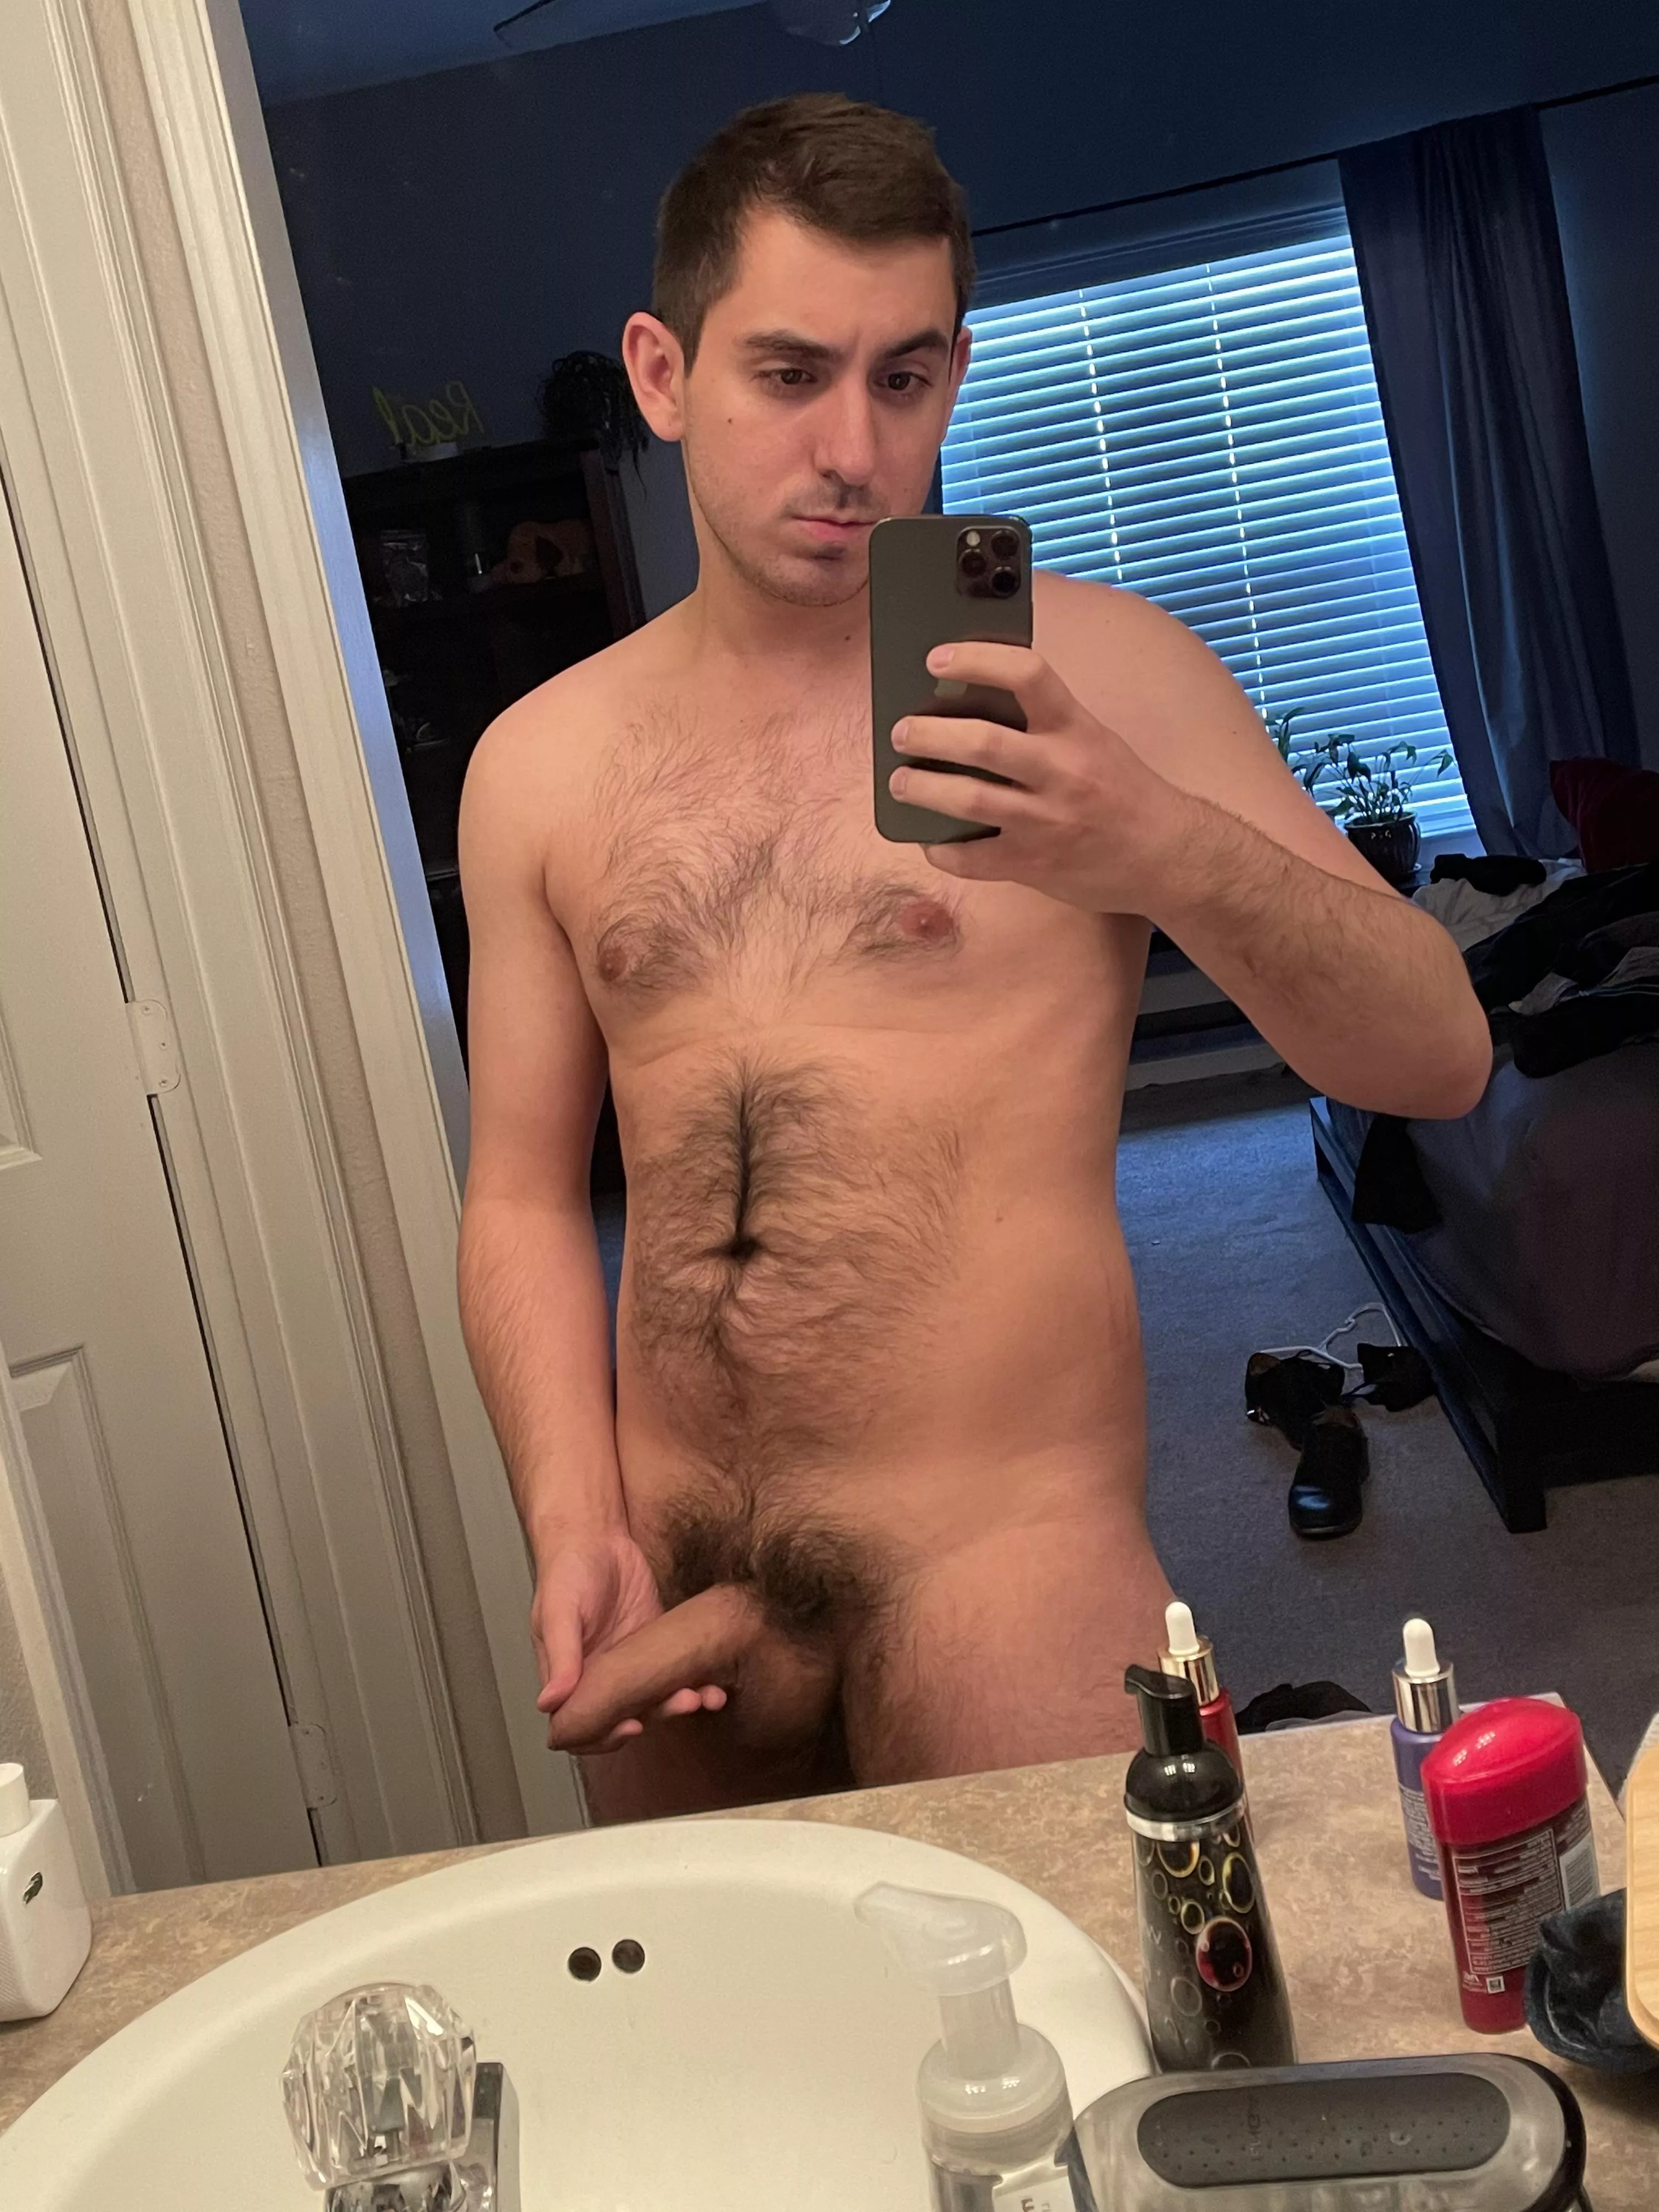 [M] What do you think?